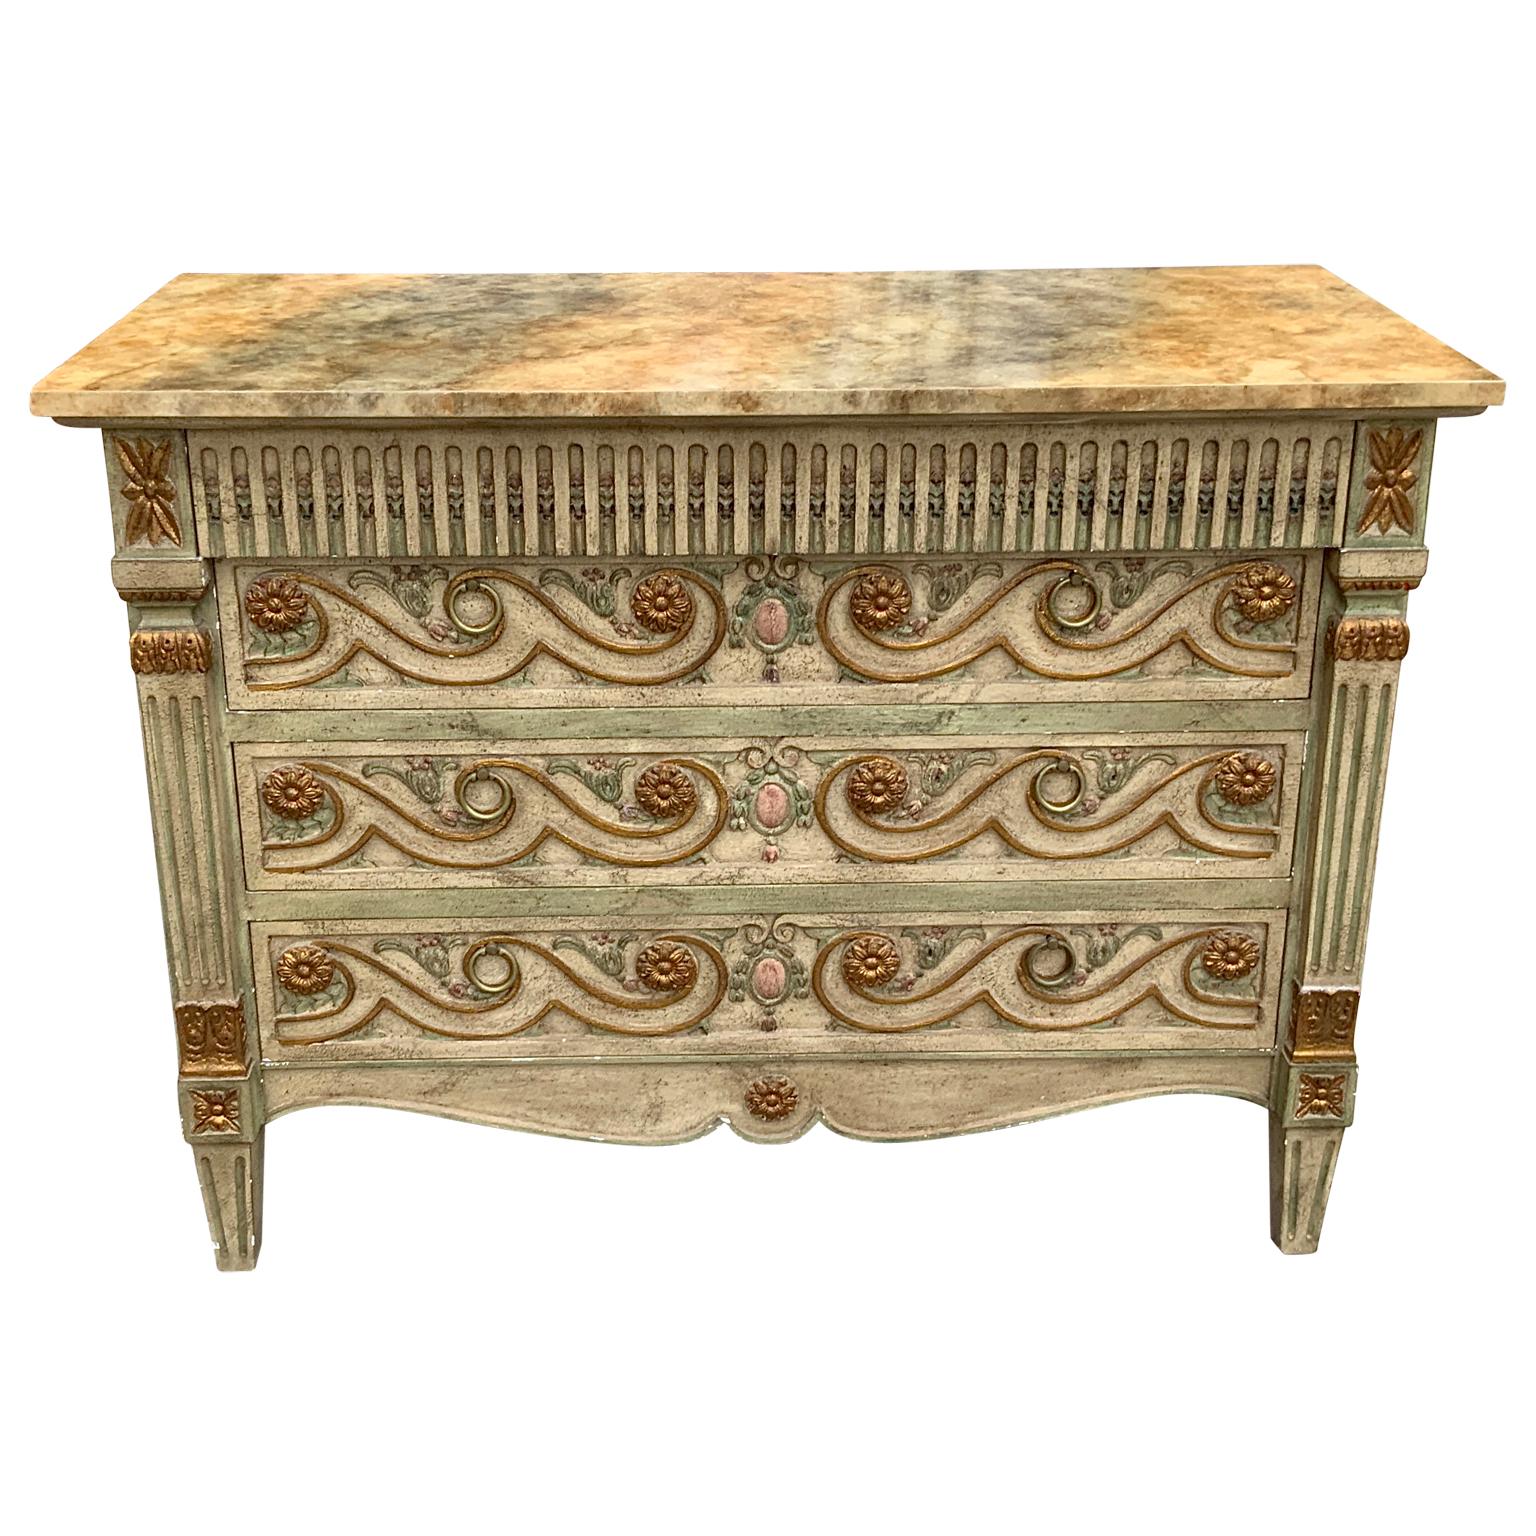 A beautiful John Widdicomb hand painted Venetian 3 Drawer chest. Faux marble painted top. The front of the chest is hand carved and painted in a fabulous green and gilt gold unique patina. Has nice brass ring pulls and  a fourth top secret